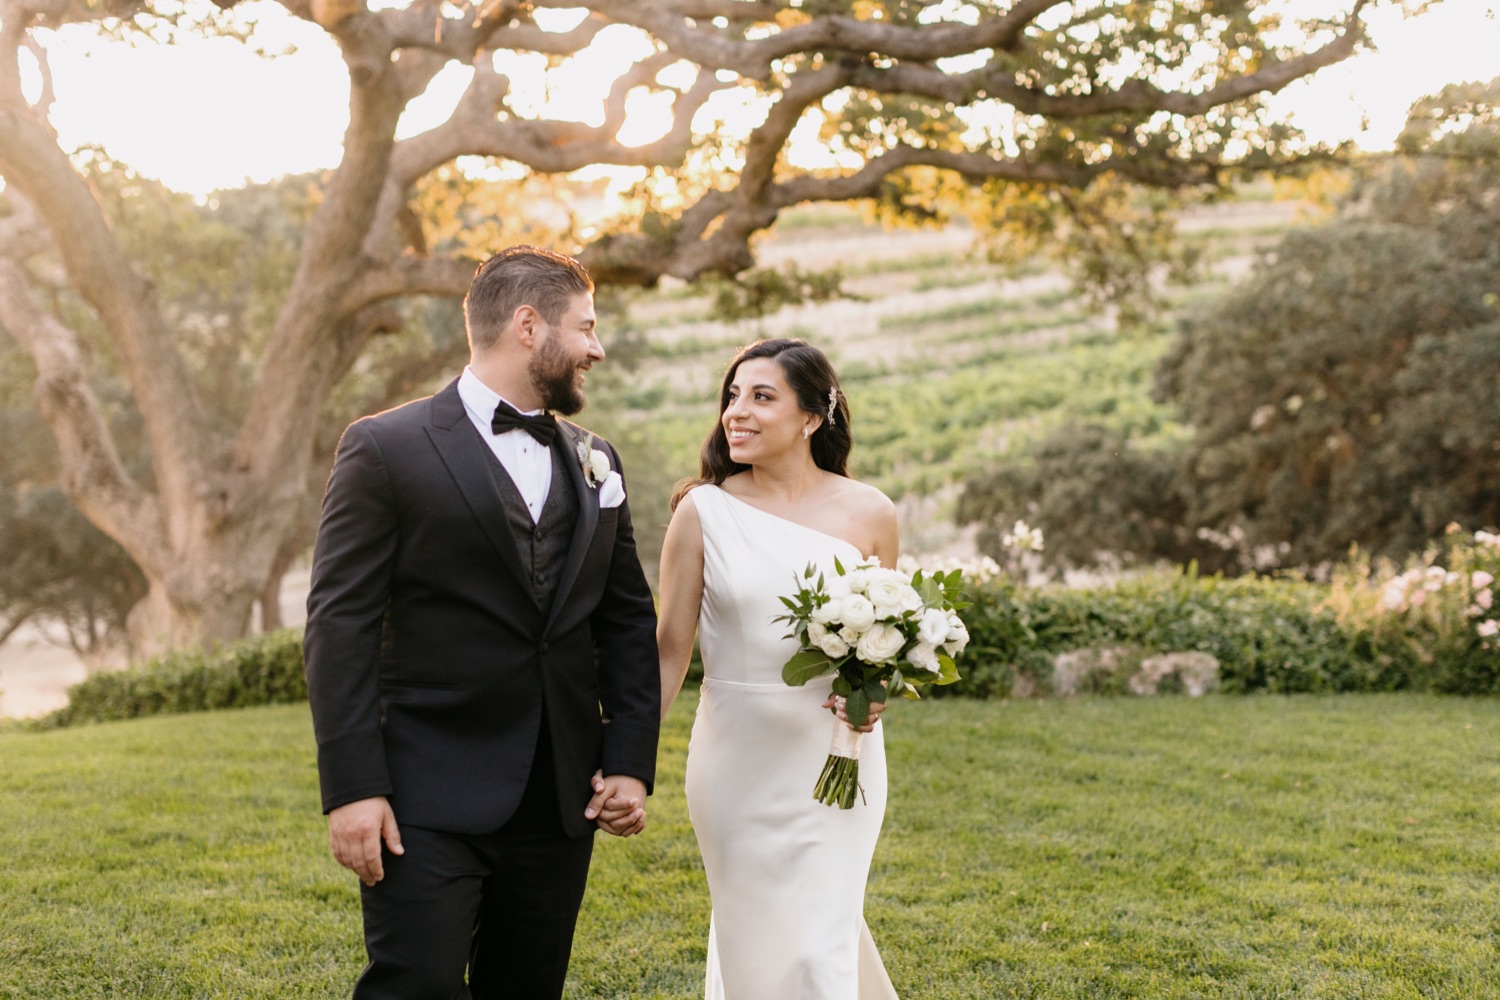 Bride and groom walking and smiling during sunset photos at Villa San Juliette winery